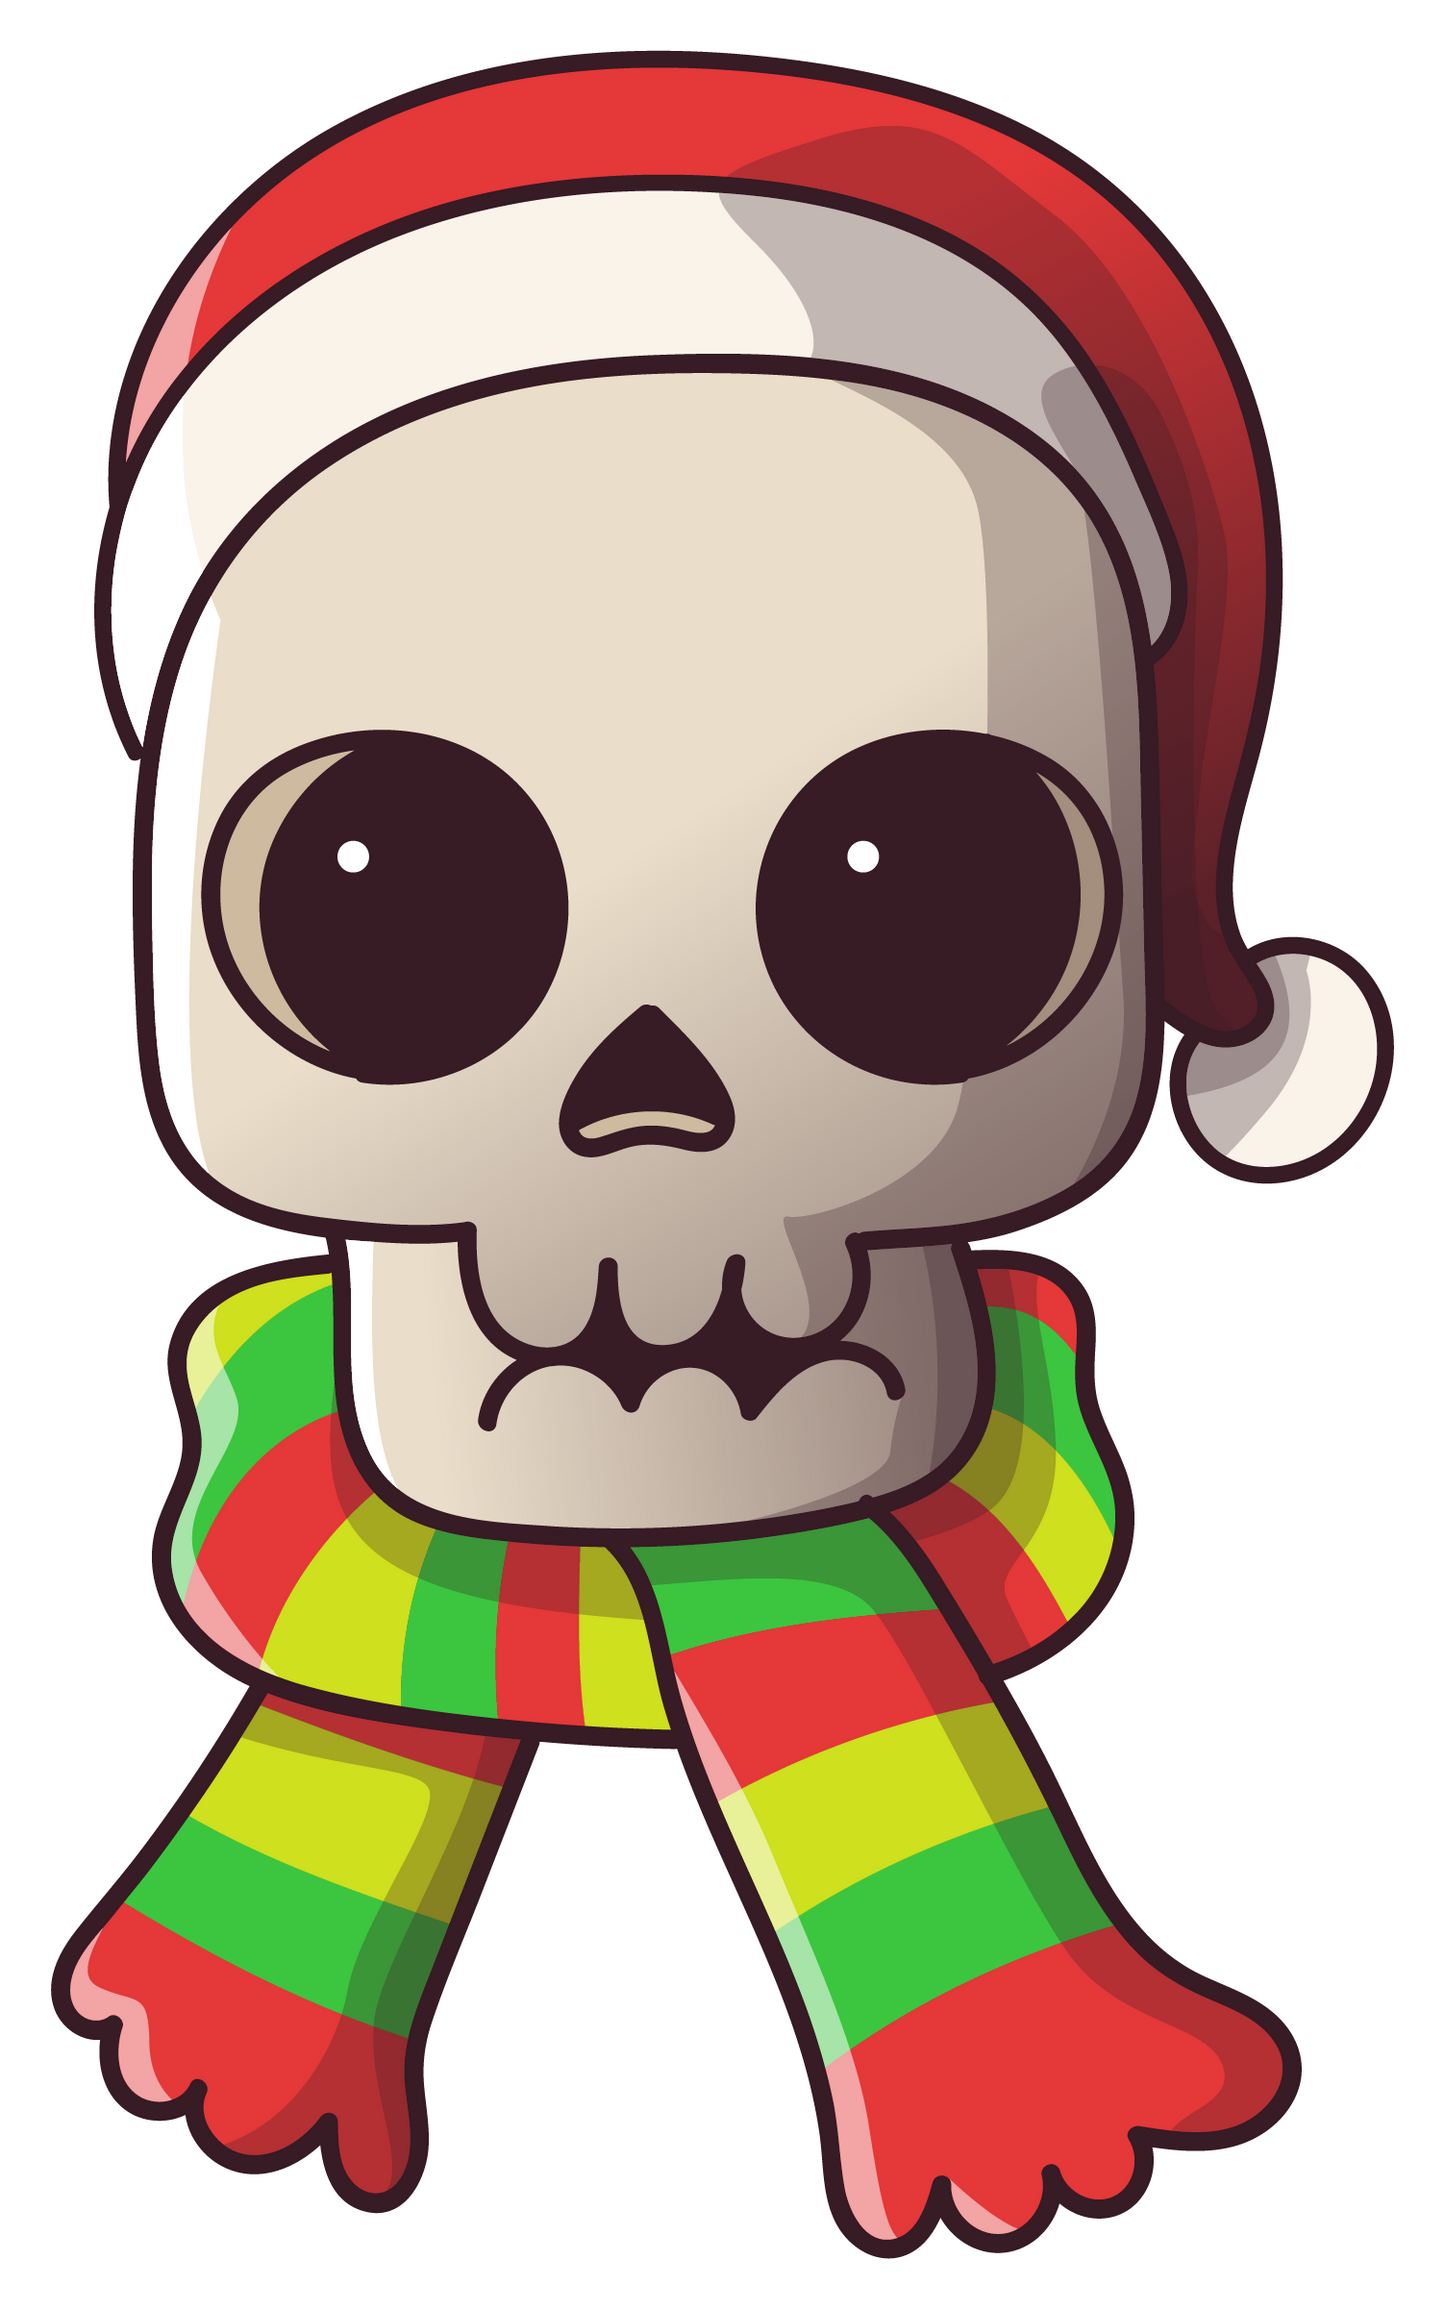 Stickers- Skull with Hat and Scarf Sticker, Christmas  Stickers